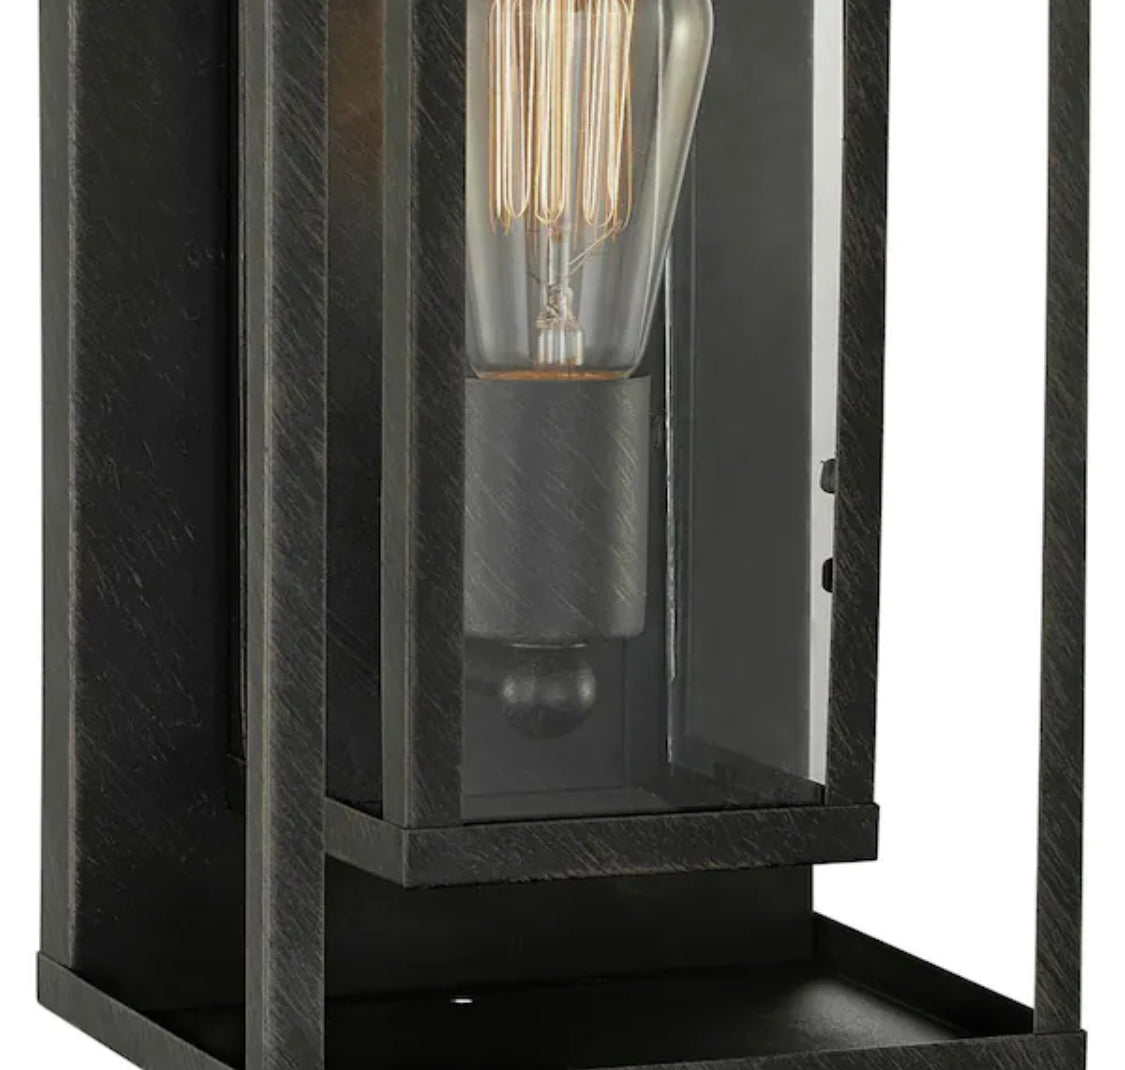 Globe Electric Montague Dark Bronze Rustic Outdoor 1-Light Wall Sconce - Damaged Box